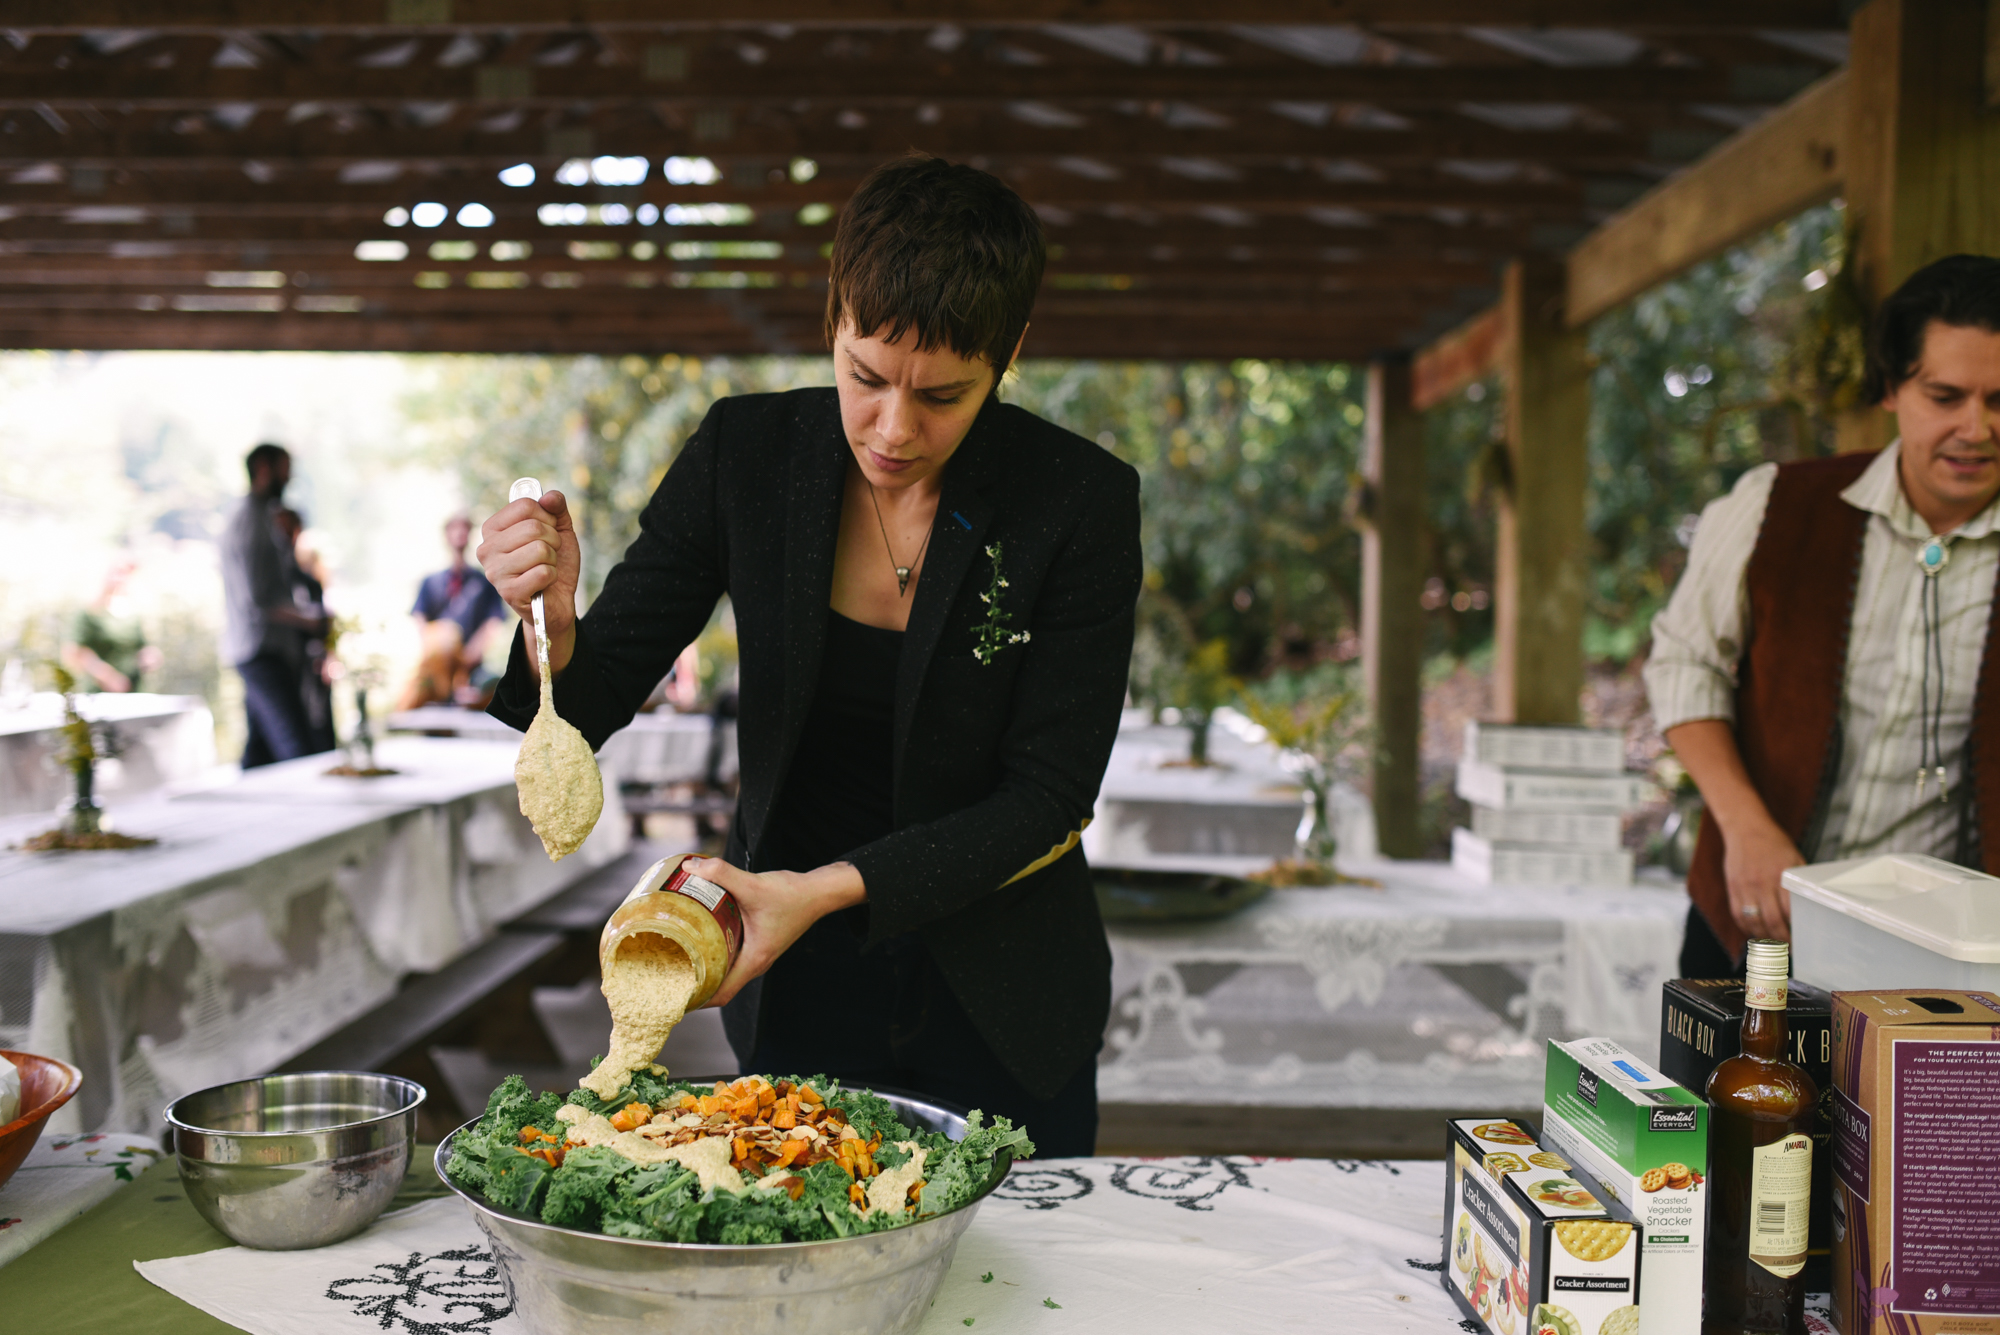  Mountain Wedding, Outdoors, Rustic, West Virginia, Maryland Wedding Photographer, DIY, Casual, Family prepping food for reception 